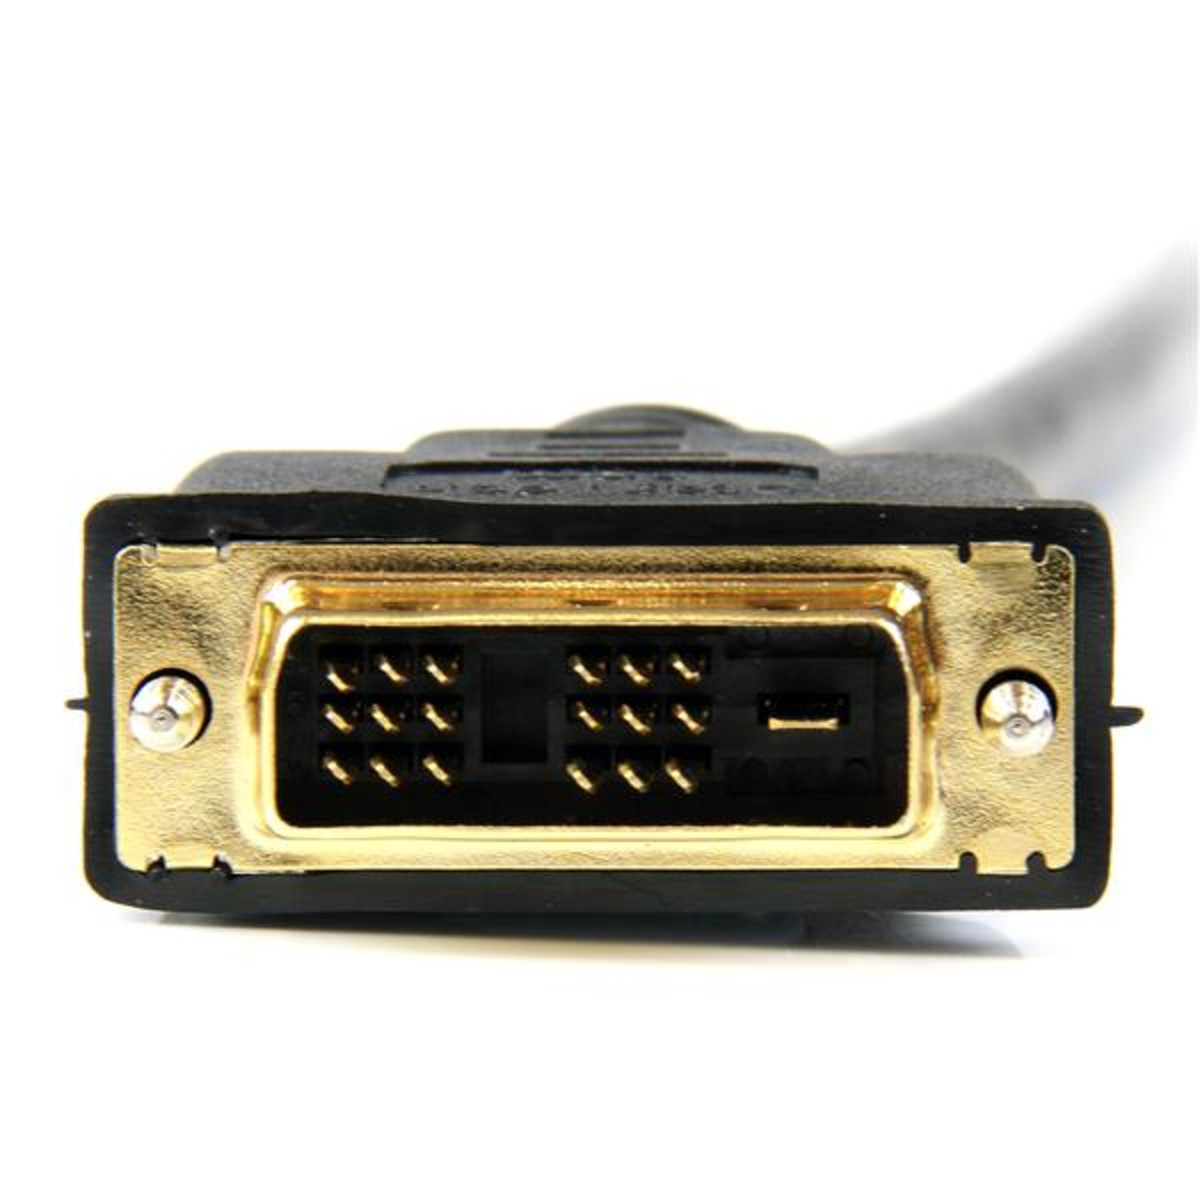 1m HDMI to DVI-D Cable - M/M